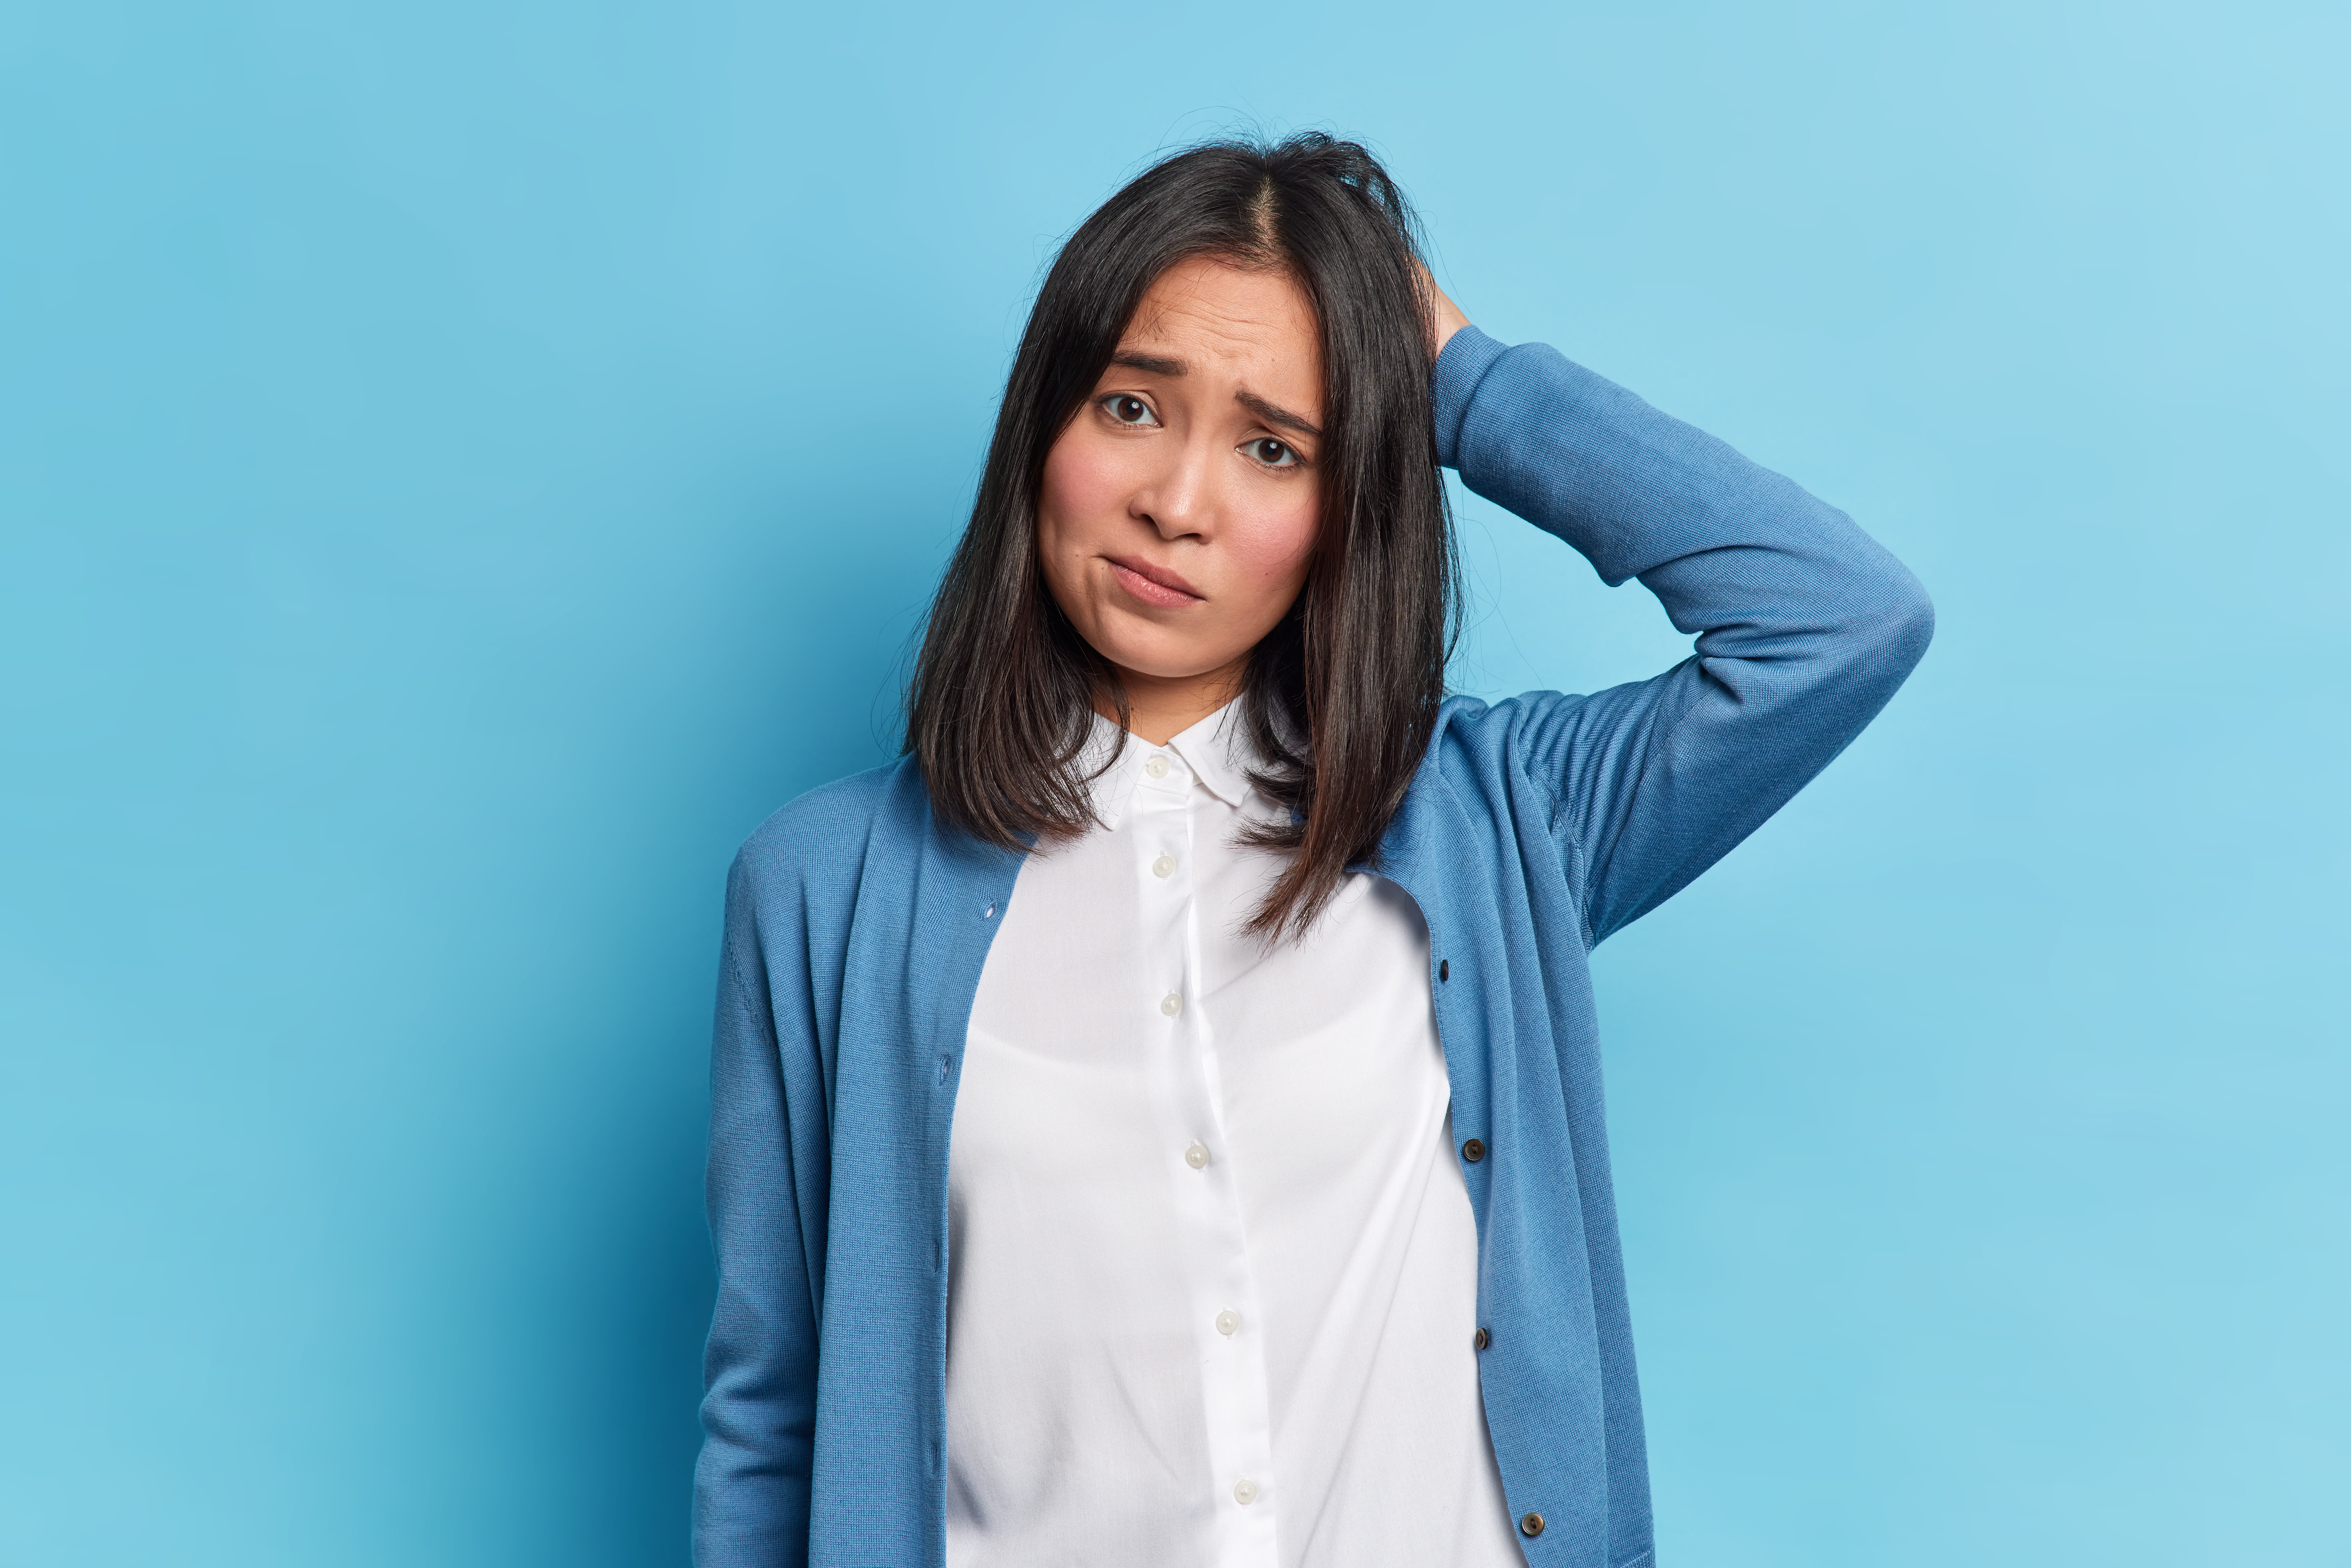 disappointed grumpy brunette young woman with eastern appearance scratches head frowns face looks unhappily camera wears white shirt blue jumper poses indoor negative emotions concept 10 Lý do gây rụng tóc ở Phụ nữ sau tuổi 30 Go1Care